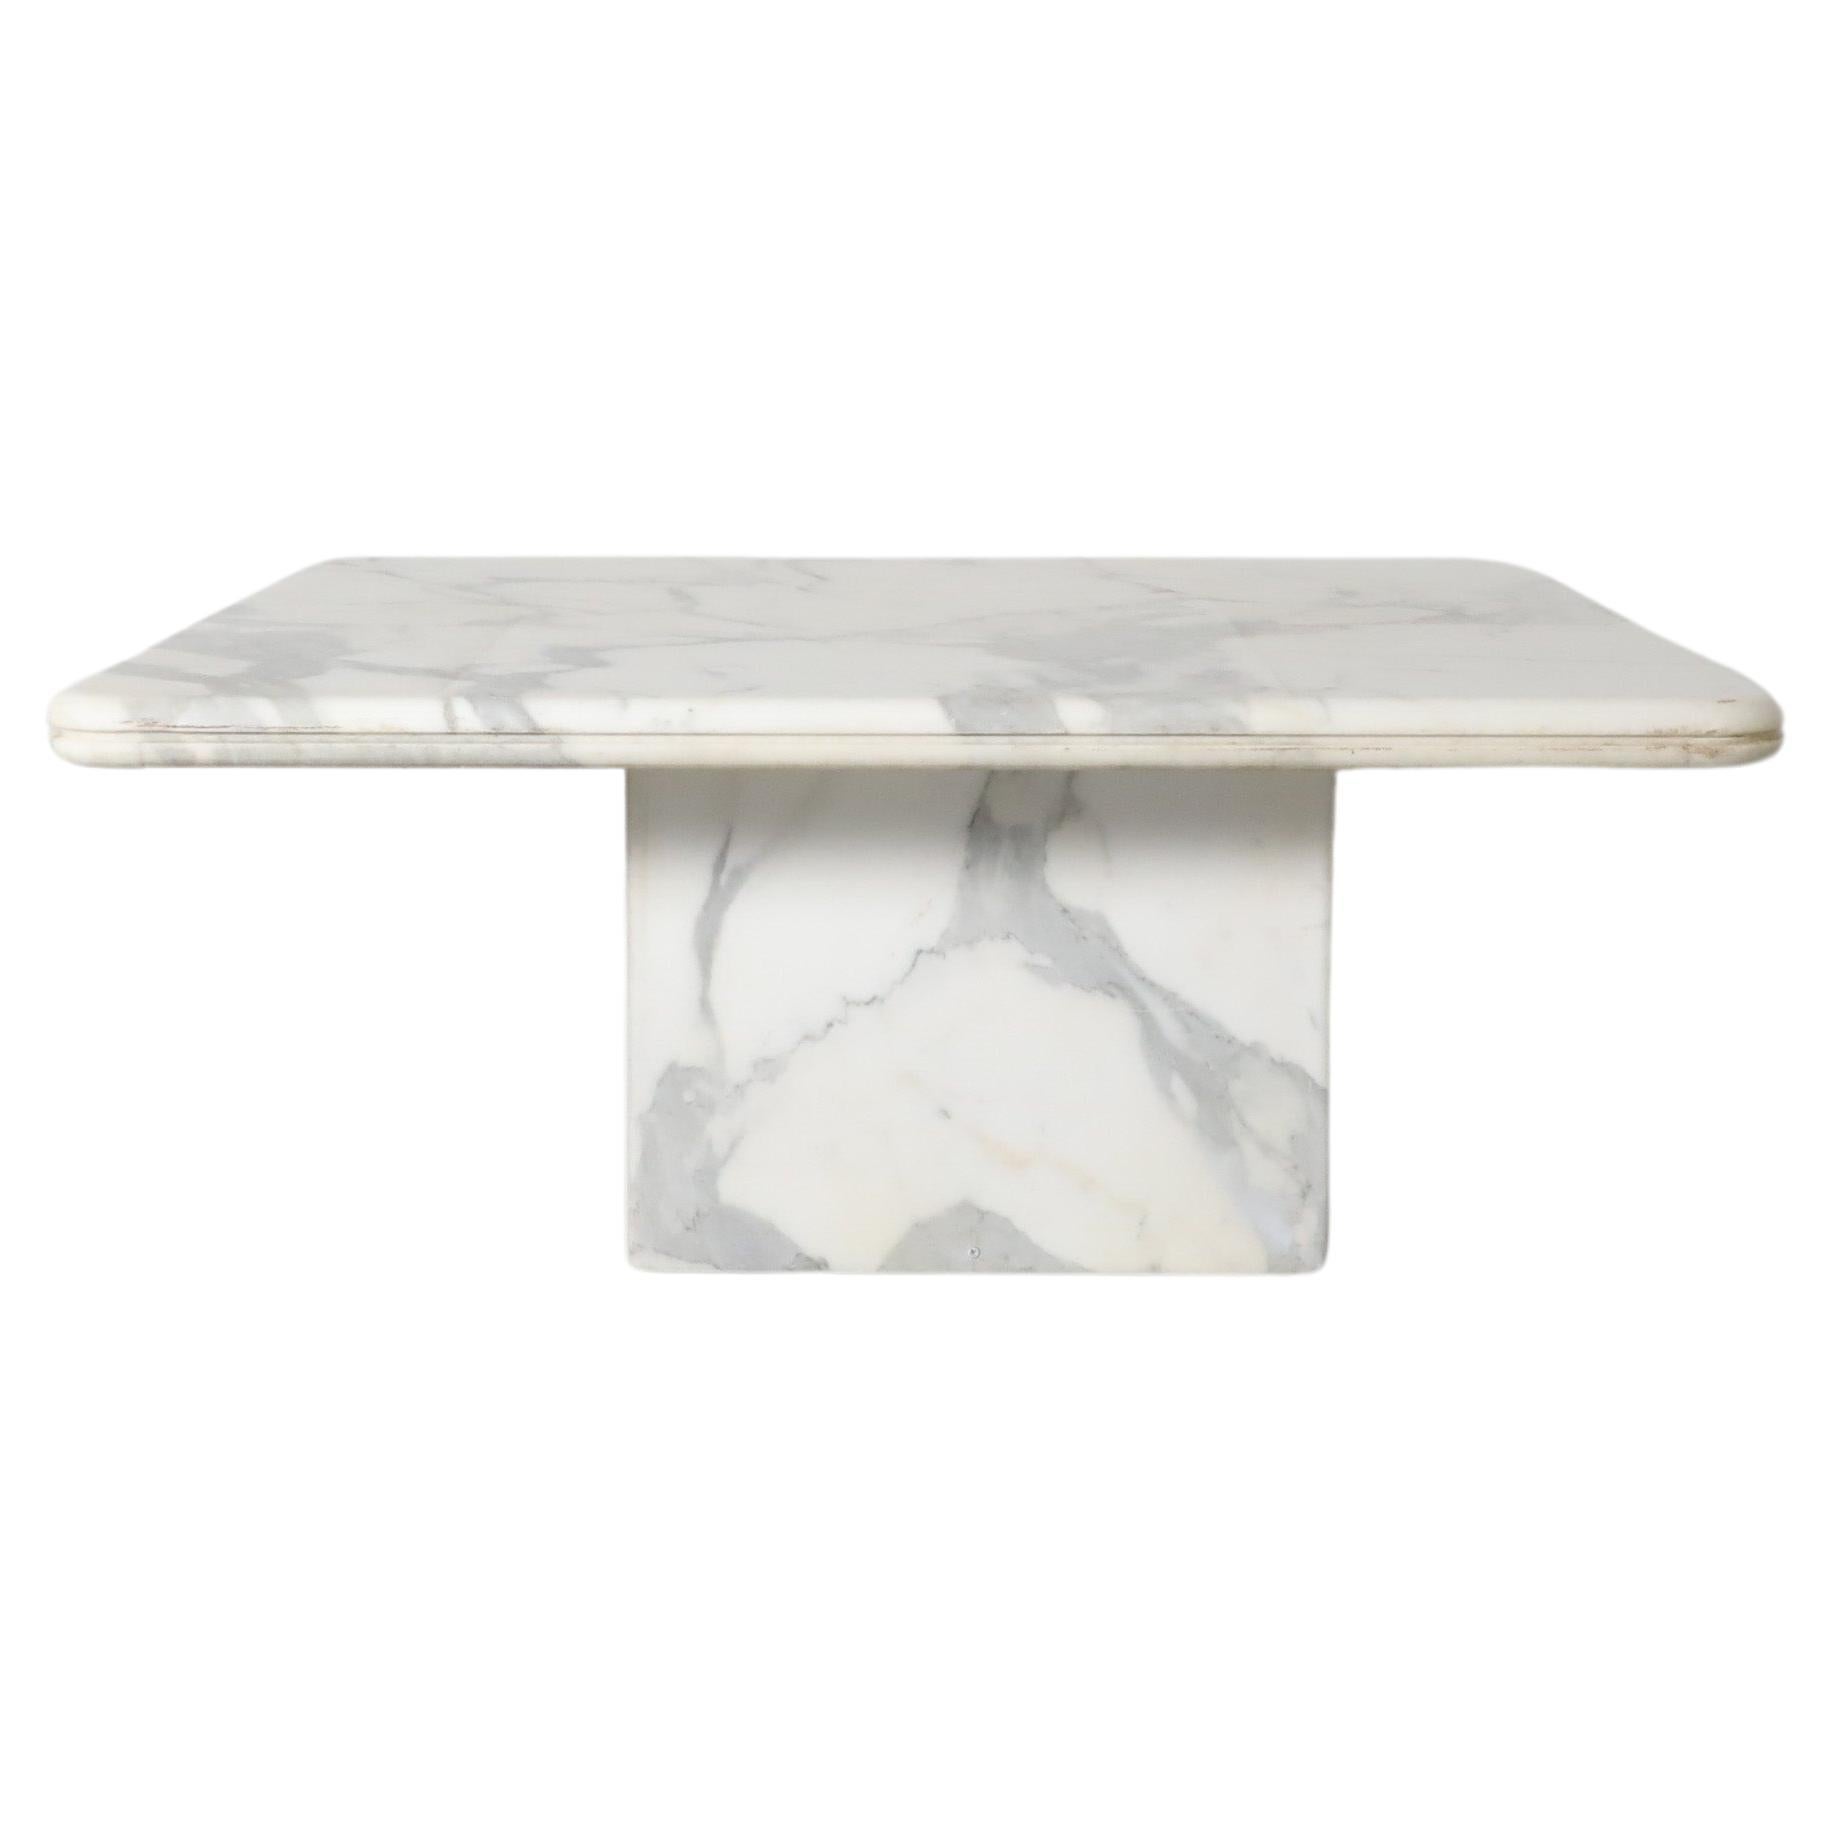 Angelo Mangiarotti Style Modernist Marble Coffee or Side Table For Sale